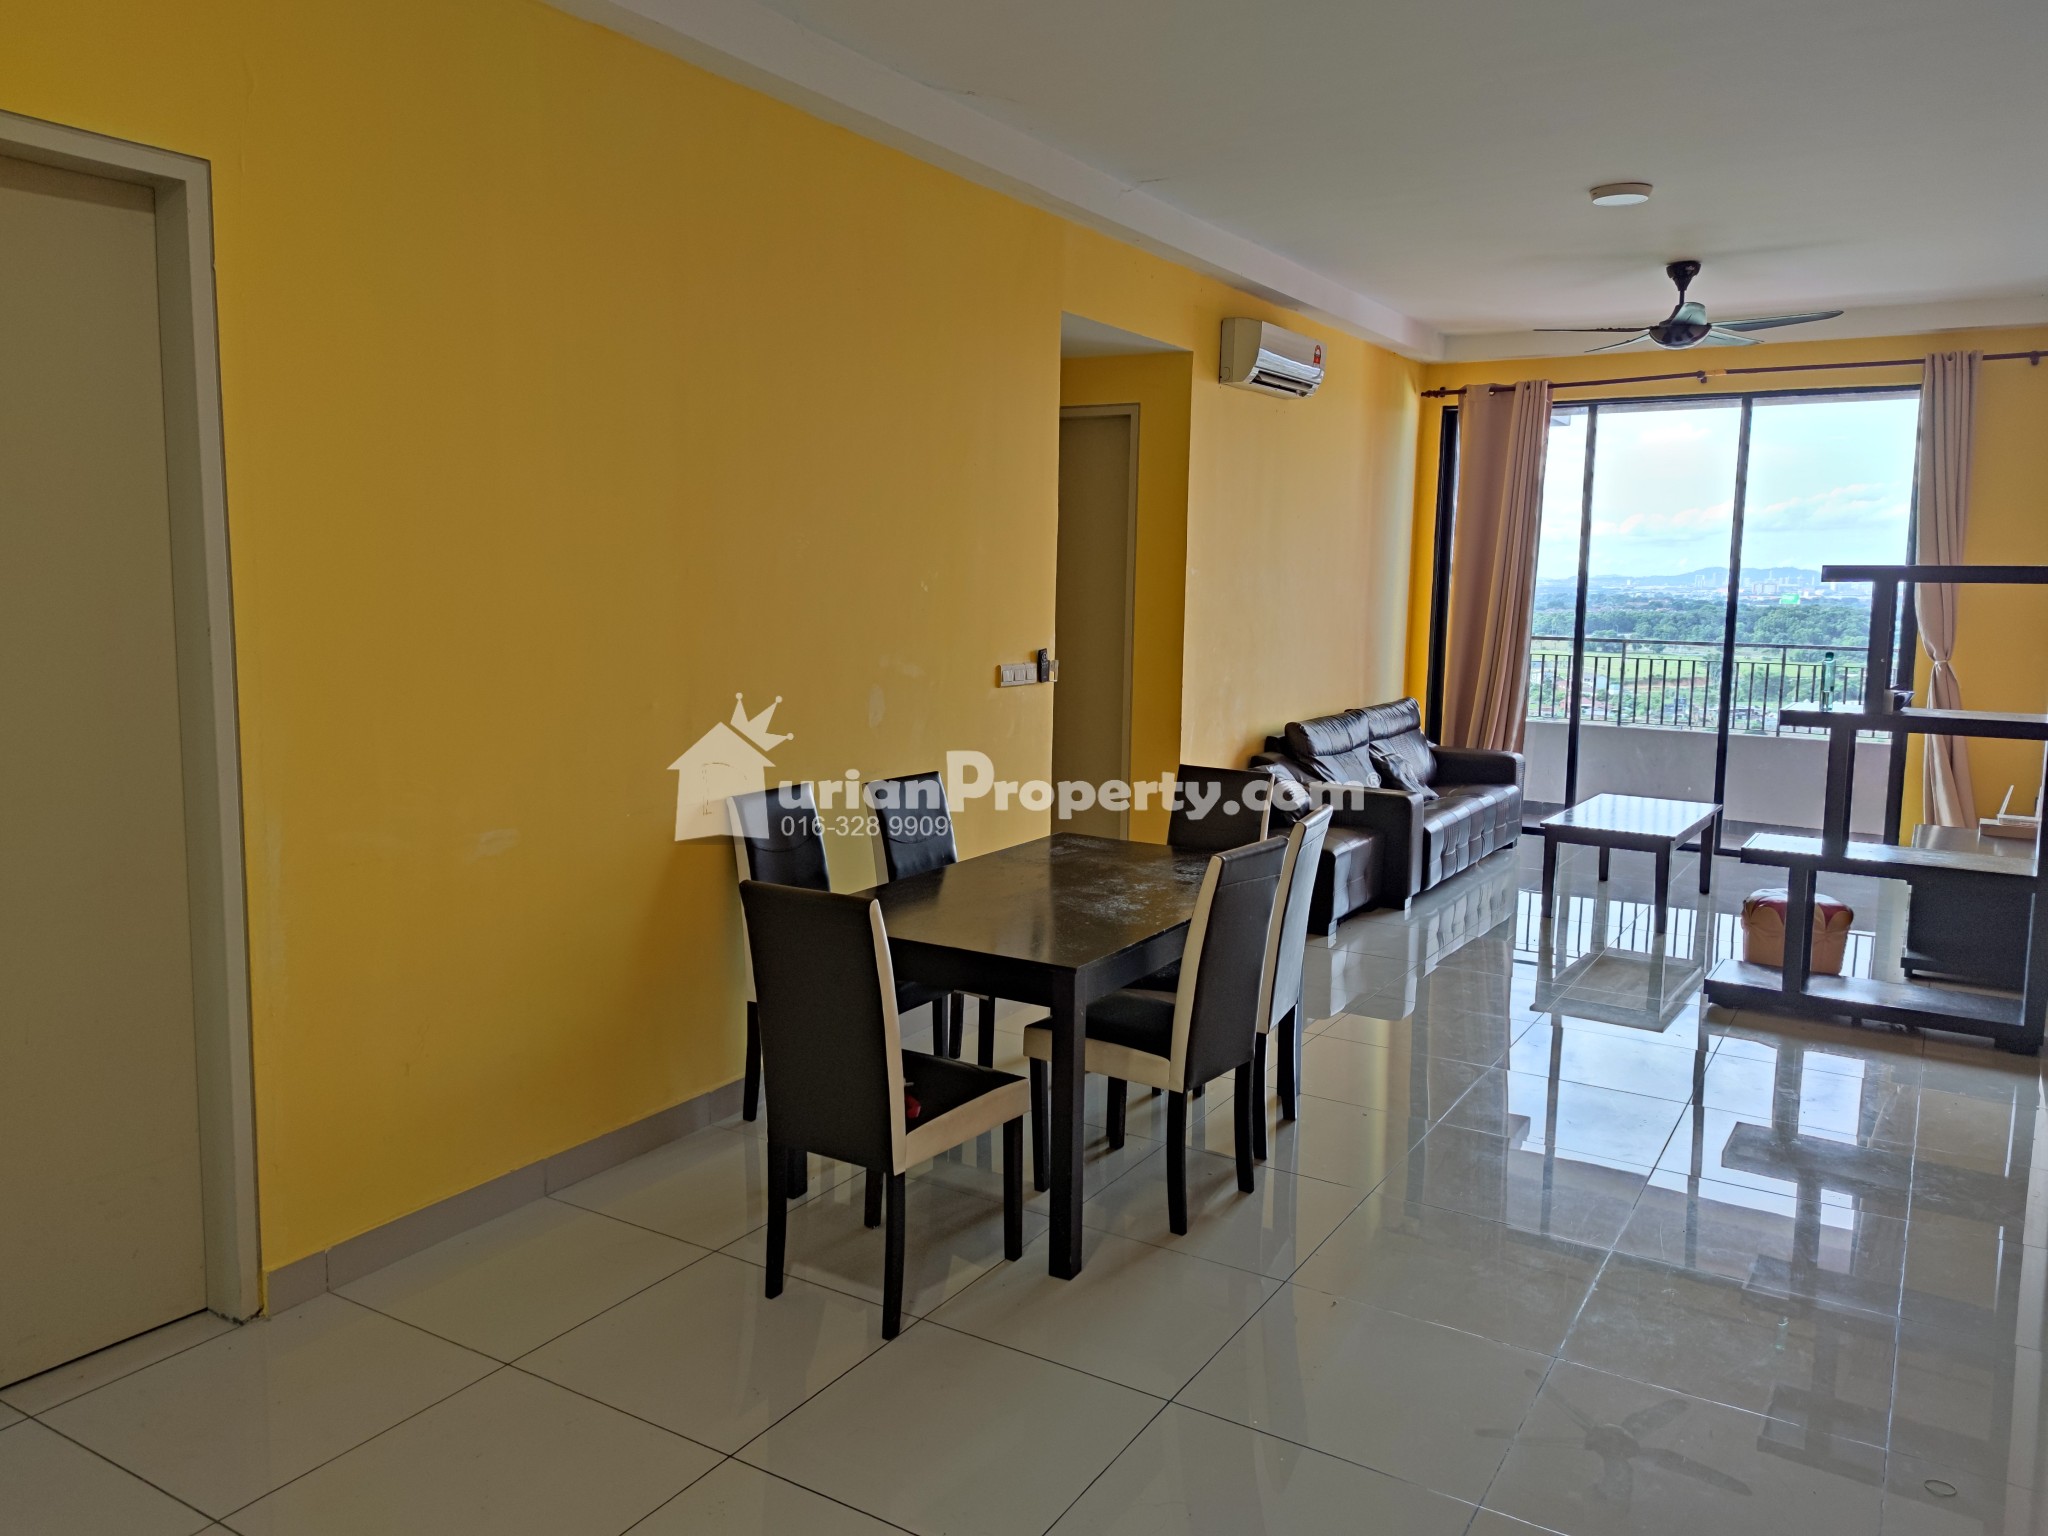 Condo For Rent at D'Aman Residence